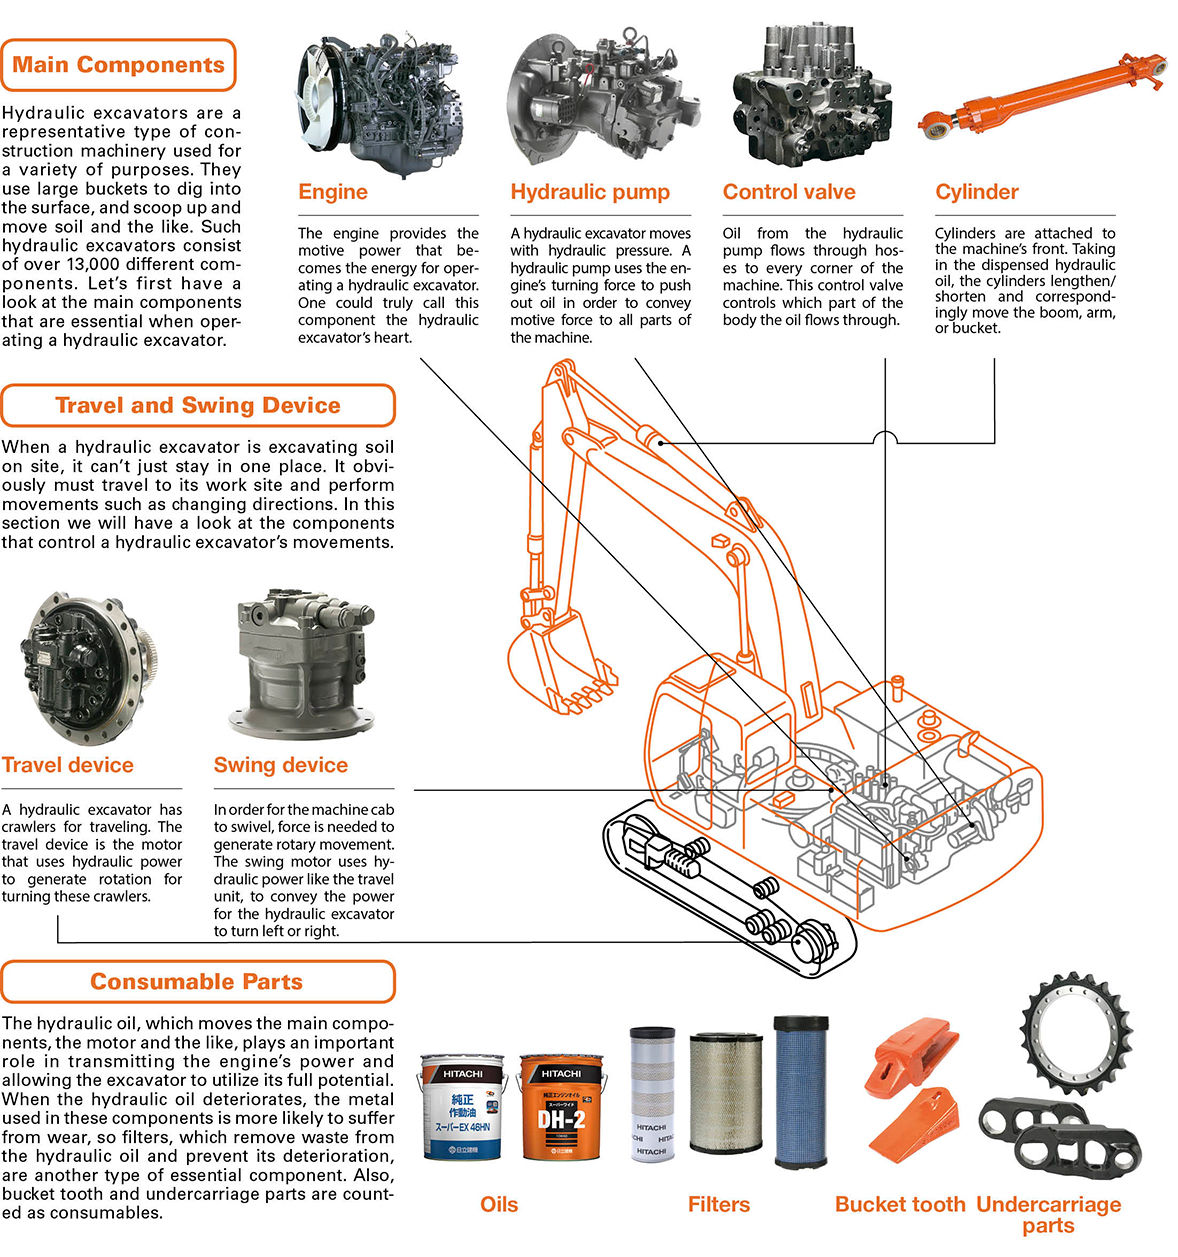 What components make up a hydraulic excavator?